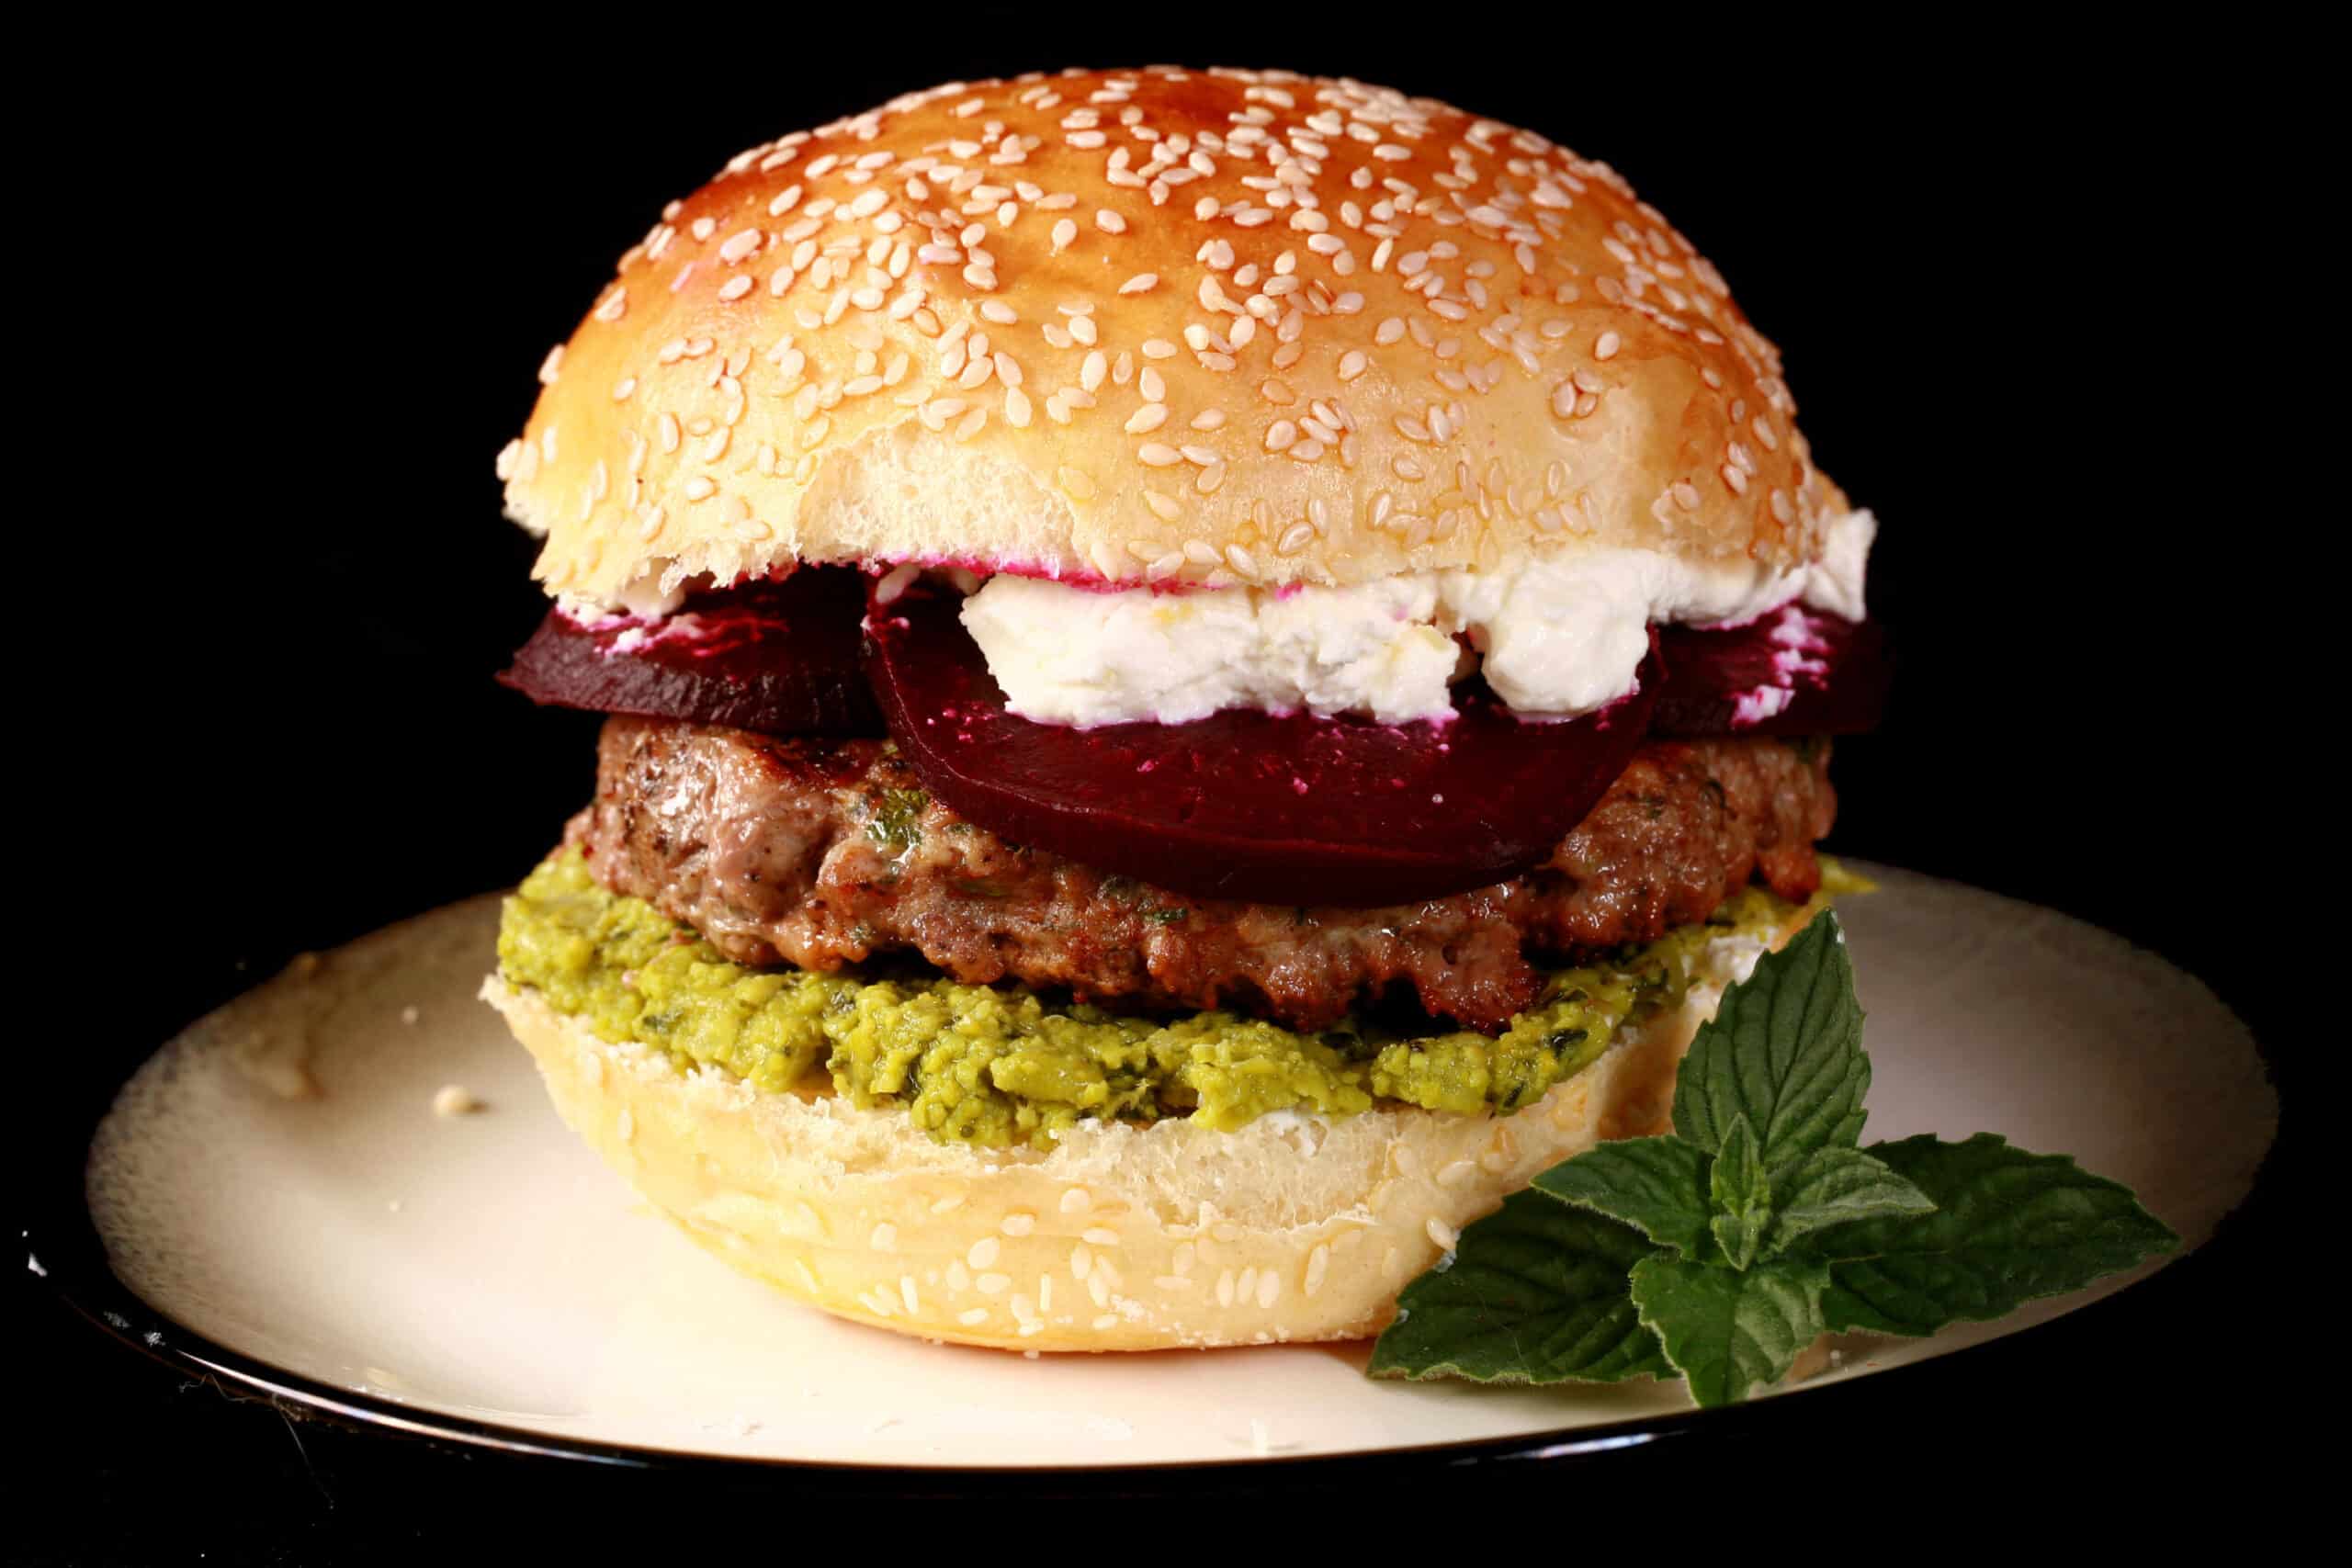 A close up photo of a moroccan lamb burger with pea hummus, goat cheese, and roasted beets.